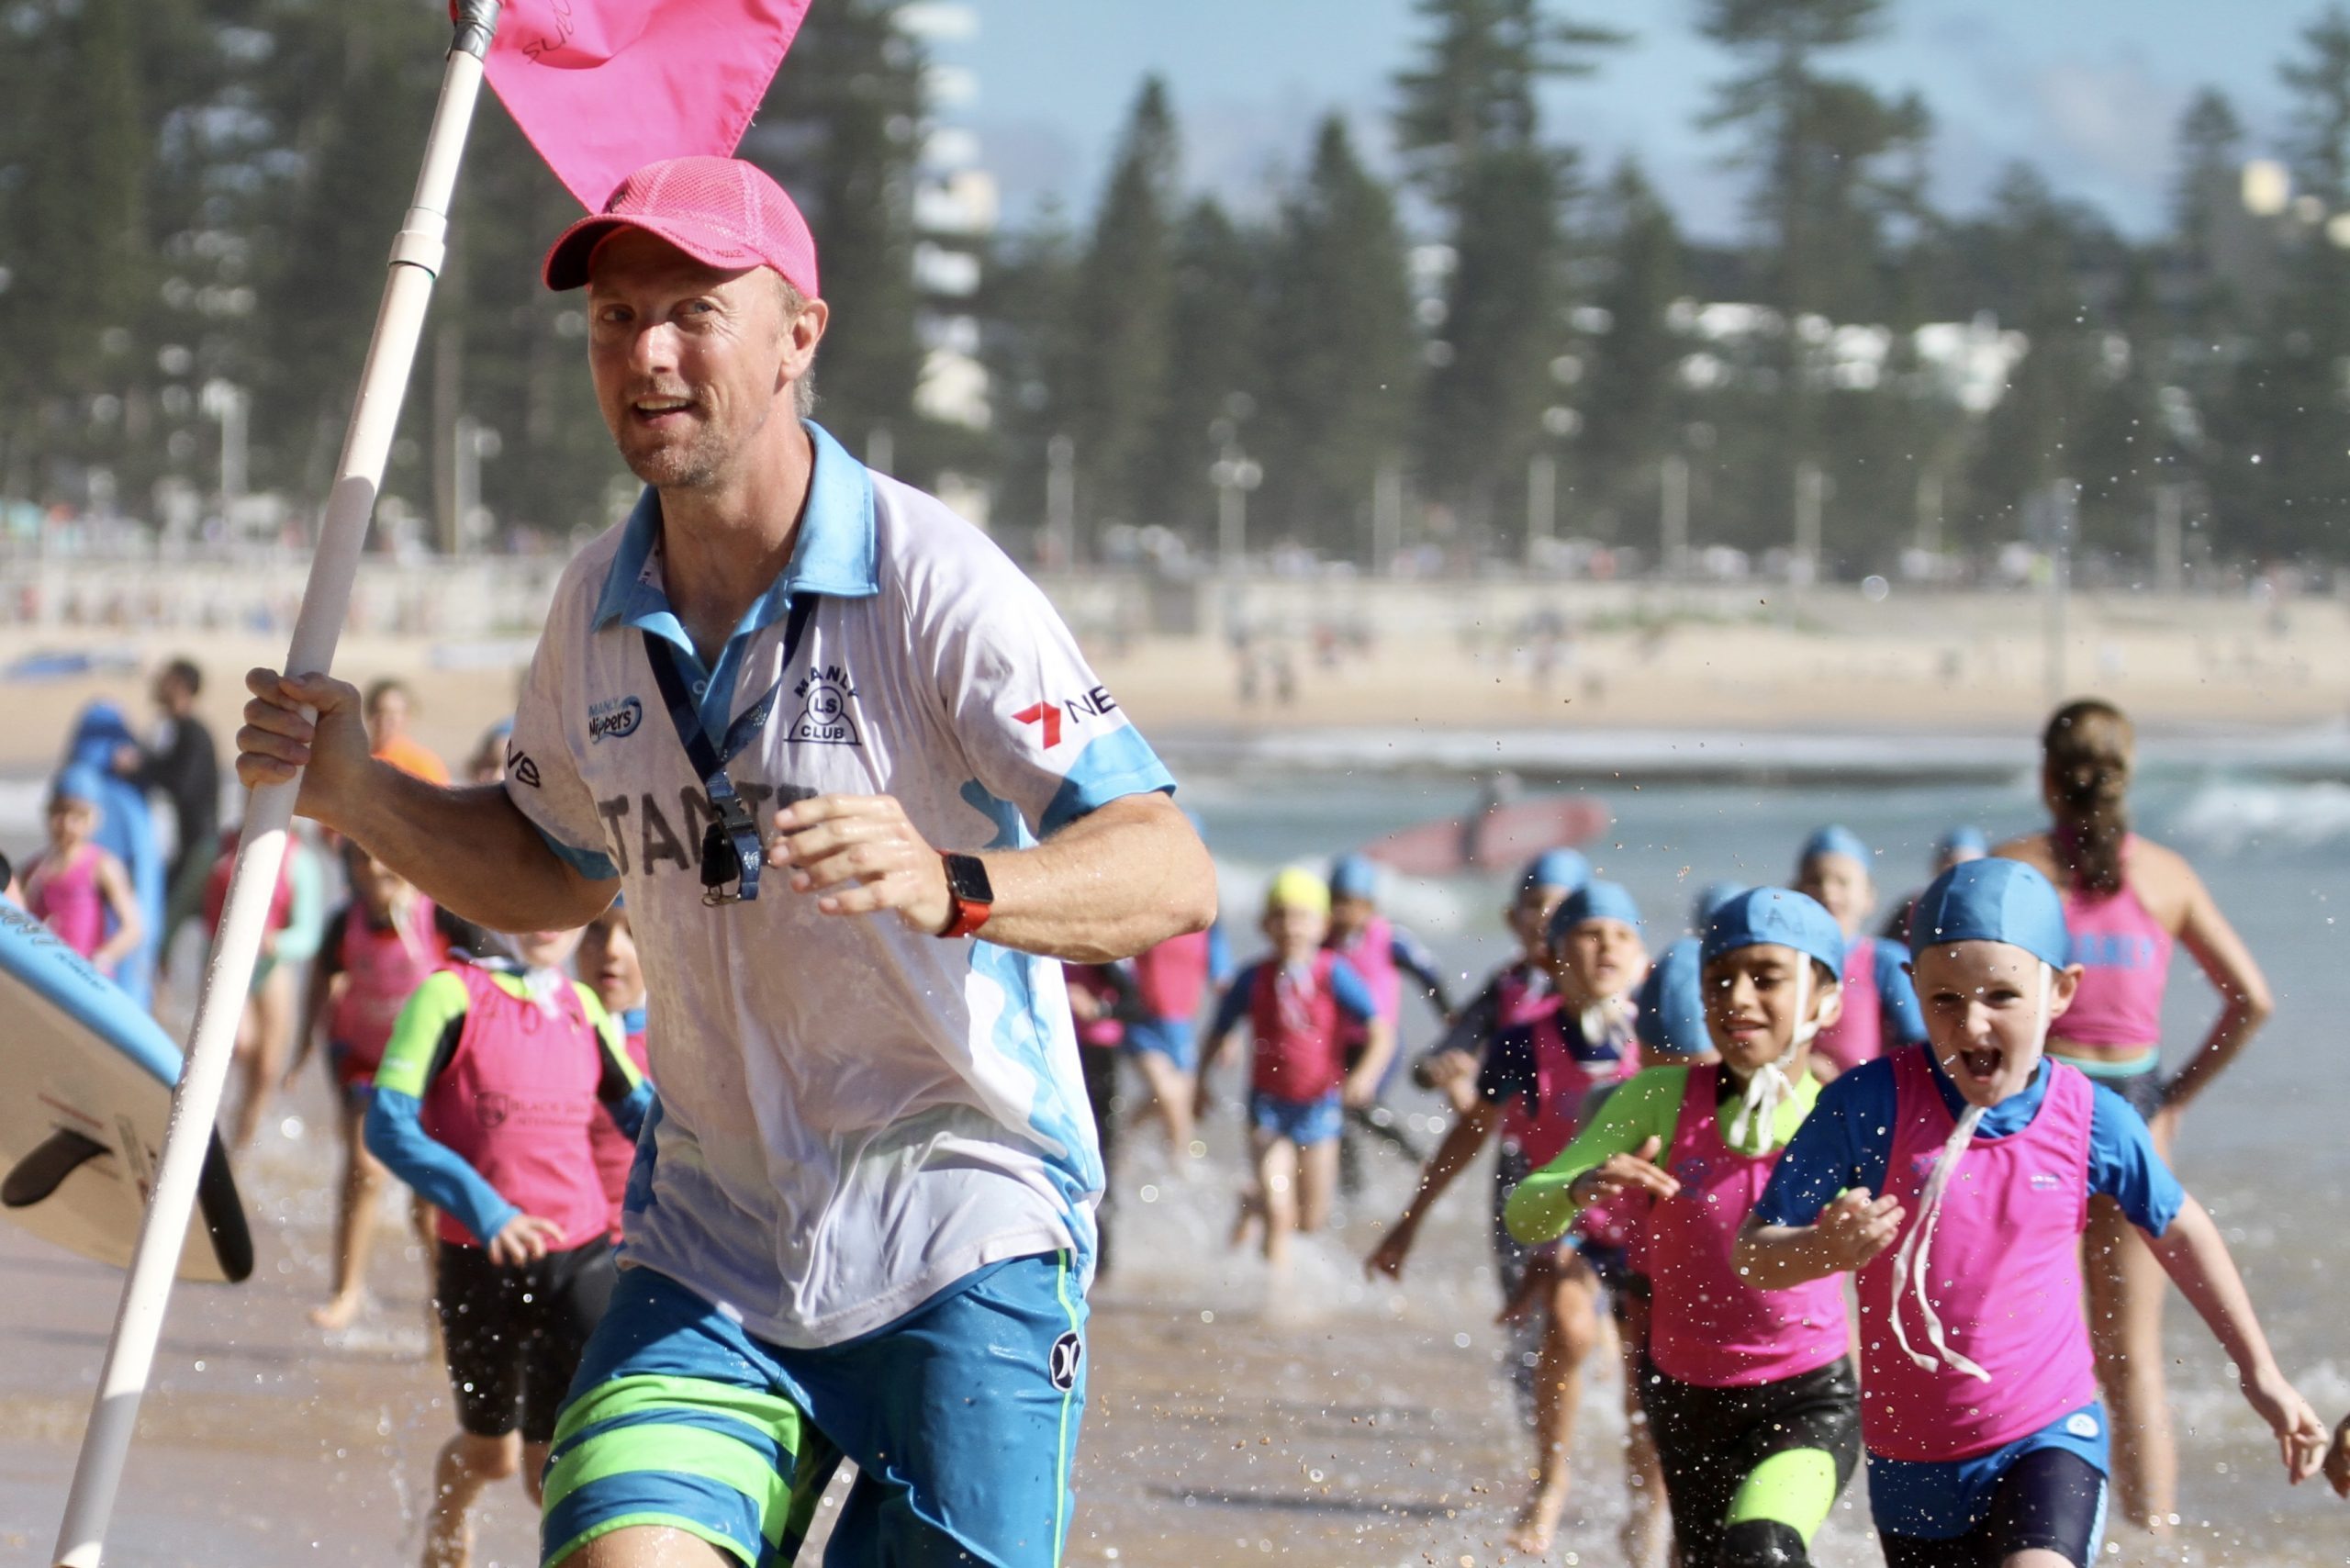 JOIN MANLY NIPPERS